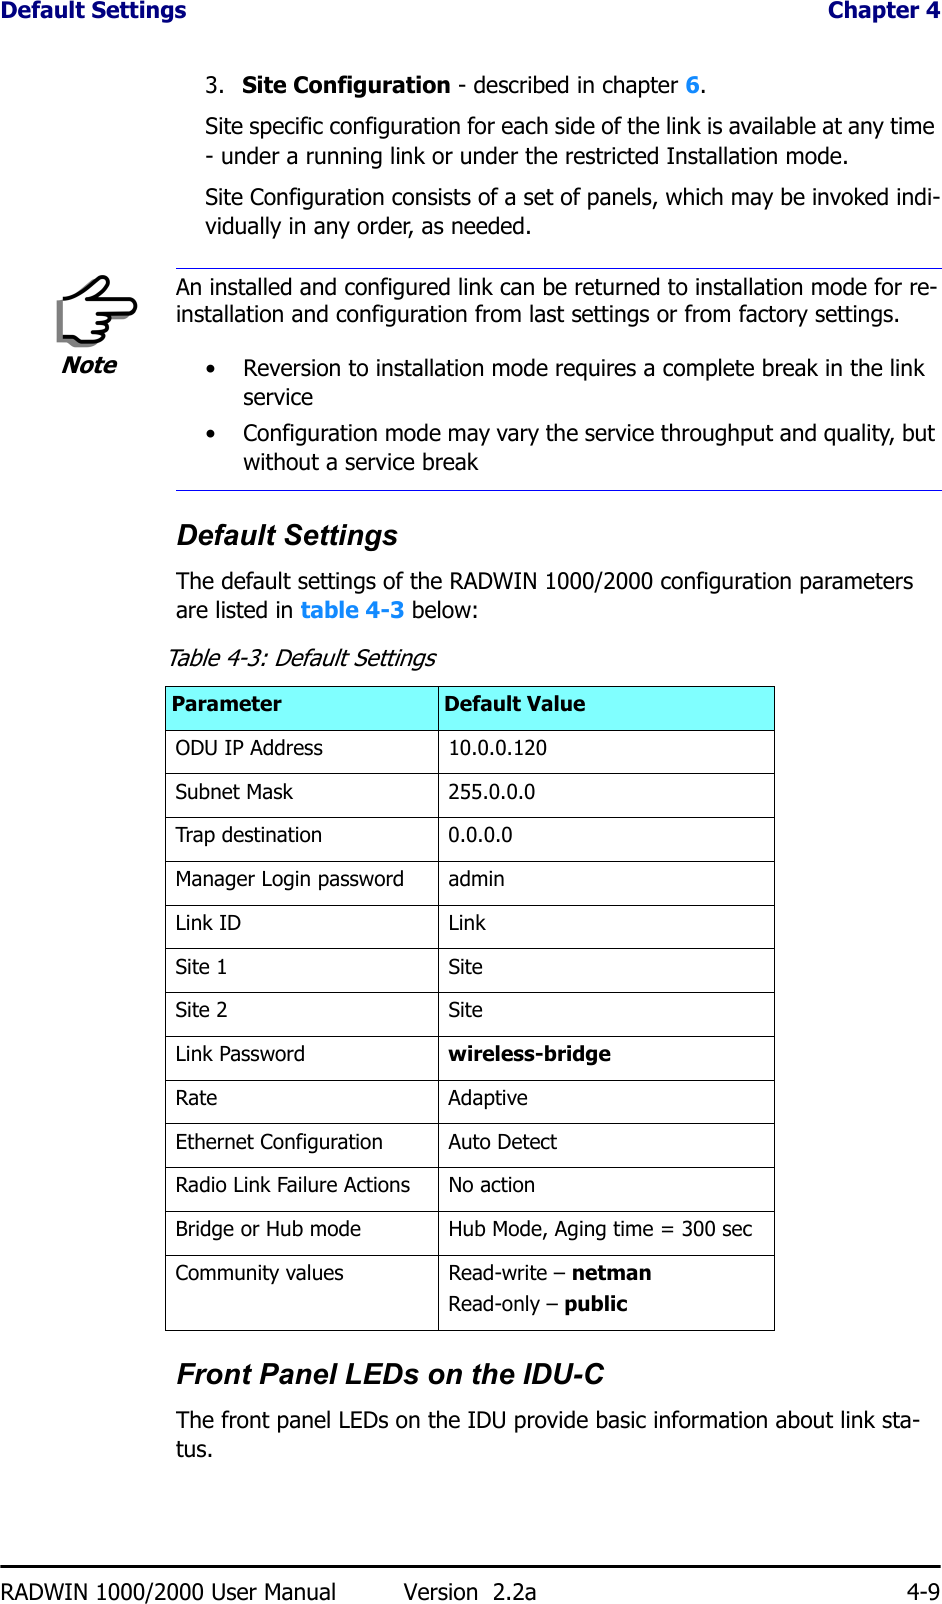 Default Settings  Chapter 4RADWIN 1000/2000 User Manual Version  2.2a 4-93.  Site Configuration - described in chapter 6.Site specific configuration for each side of the link is available at any time - under a running link or under the restricted Installation mode.Site Configuration consists of a set of panels, which may be invoked indi-vidually in any order, as needed.Default SettingsThe default settings of the RADWIN 1000/2000 configuration parameters are listed in table 4-3 below:Front Panel LEDs on the IDU-CThe front panel LEDs on the IDU provide basic information about link sta-tus. NoteAn installed and configured link can be returned to installation mode for re-installation and configuration from last settings or from factory settings.• Reversion to installation mode requires a complete break in the link service• Configuration mode may vary the service throughput and quality, but without a service breakTable 4-3: Default SettingsParameter Default ValueODU IP Address 10.0.0.120Subnet Mask 255.0.0.0Trap destination 0.0.0.0Manager Login password adminLink ID Link Site 1 SiteSite 2 SiteLink Password wireless-bridgeRate AdaptiveEthernet Configuration Auto DetectRadio Link Failure Actions No actionBridge or Hub mode Hub Mode, Aging time = 300 secCommunity values Read-write – netmanRead-only – public